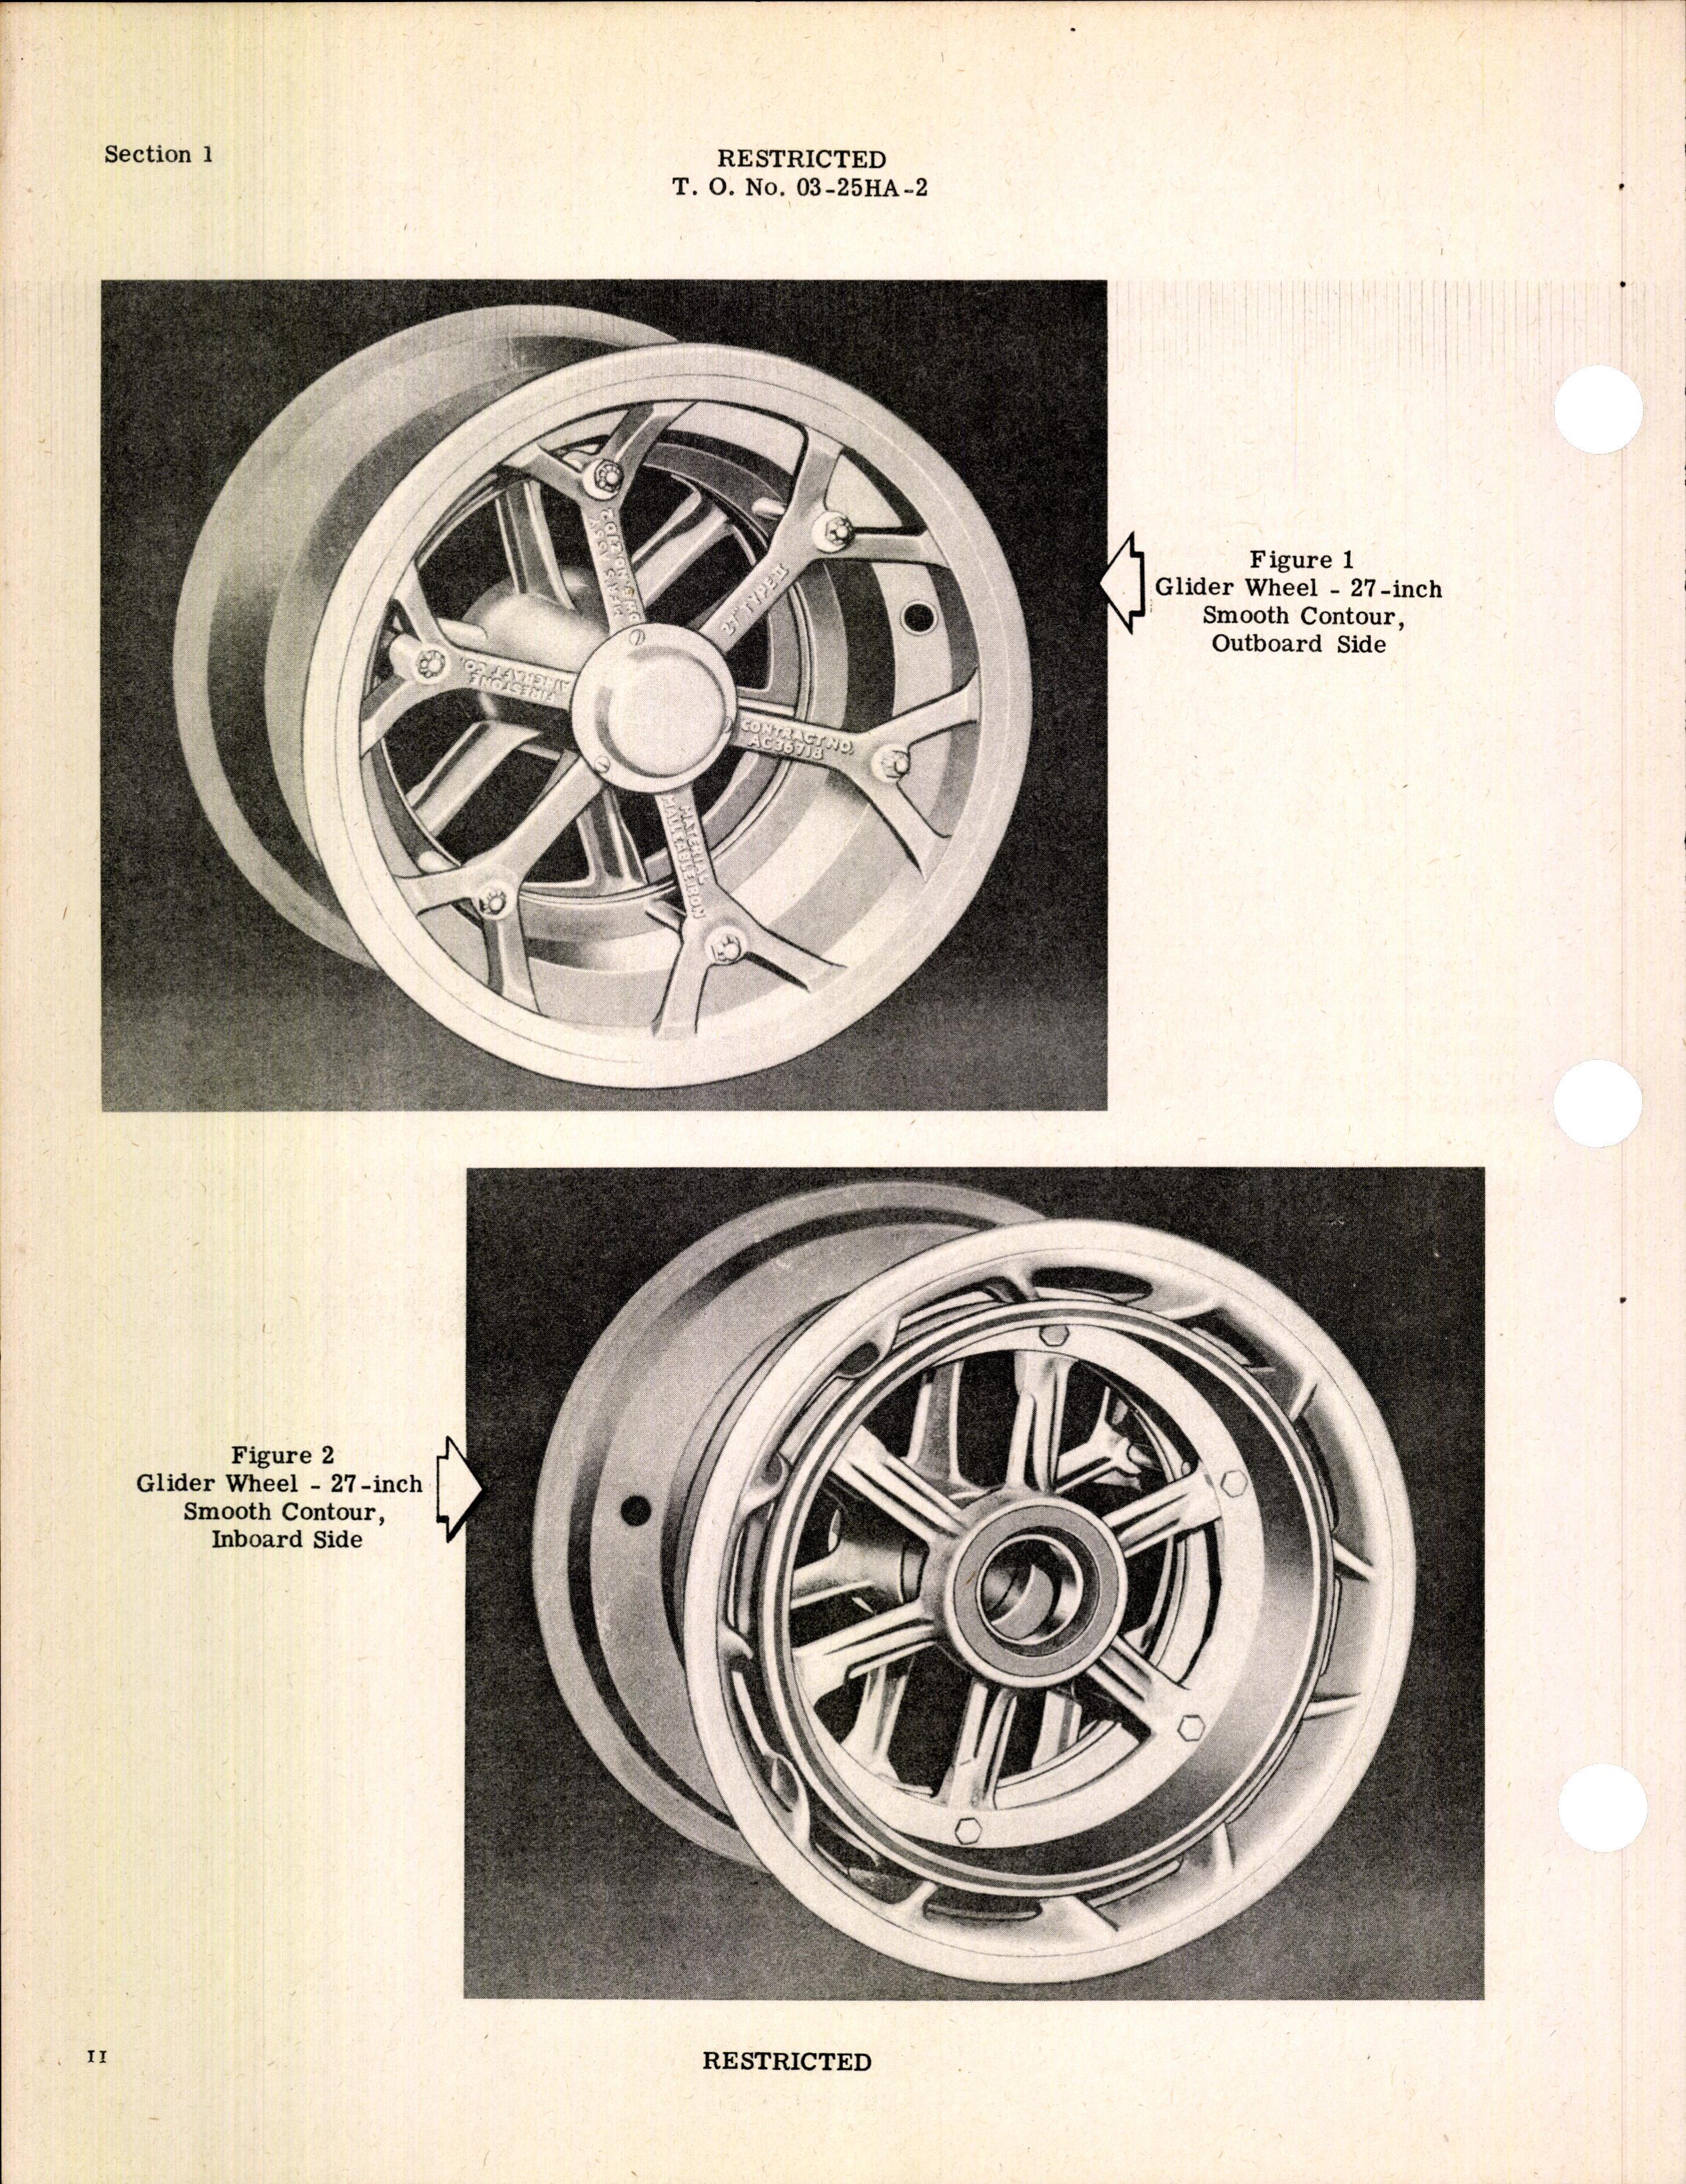 Sample page 6 from AirCorps Library document: Handbook of Instructions with Parts Catalog 27-Inch Glider Wheel